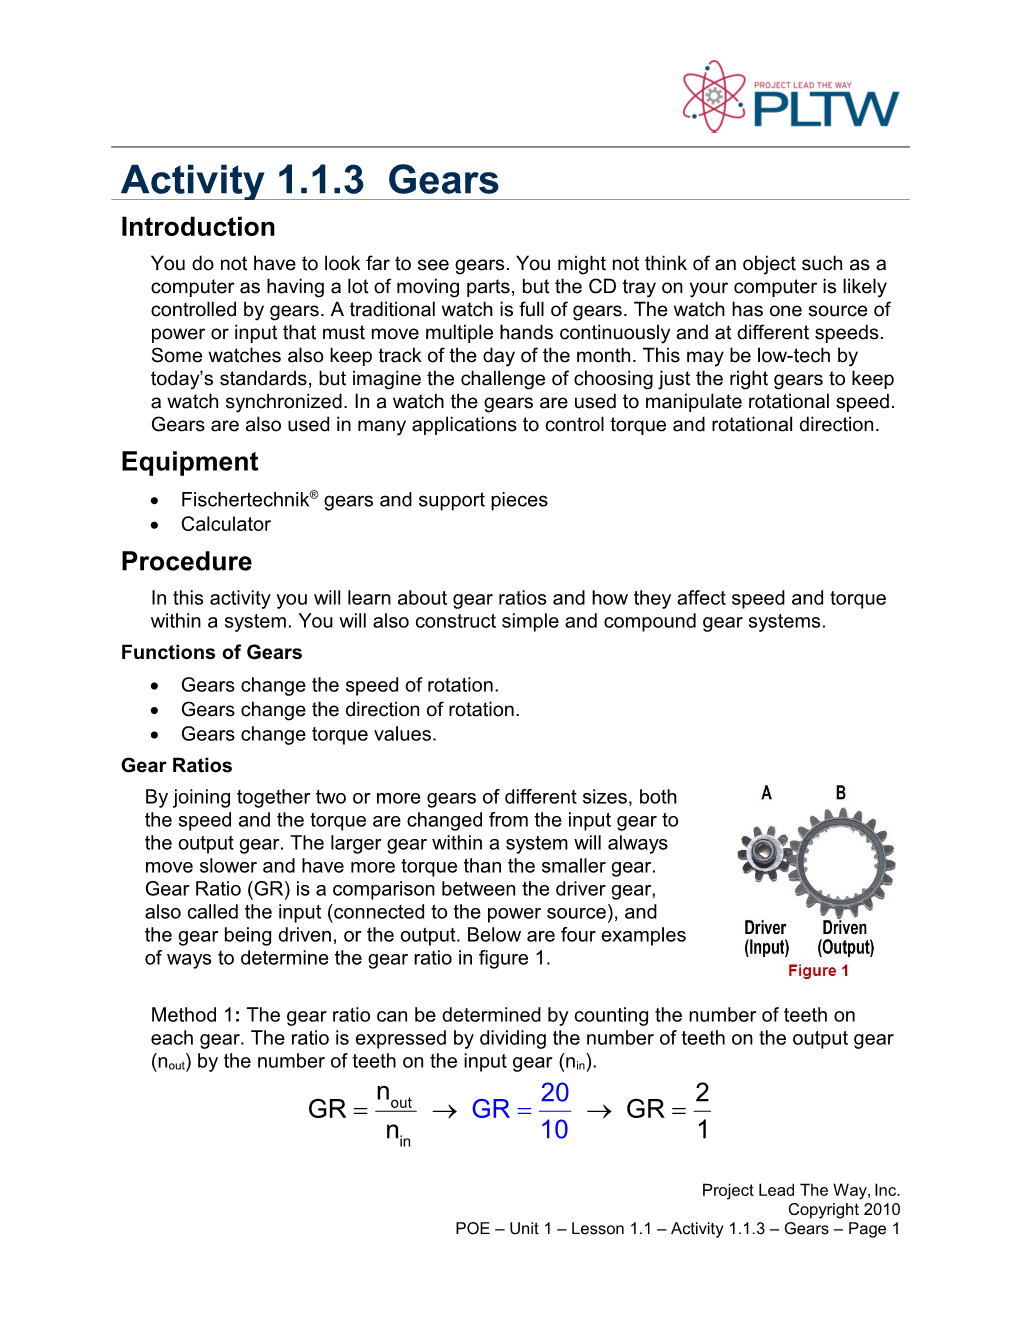 Functions of Gears